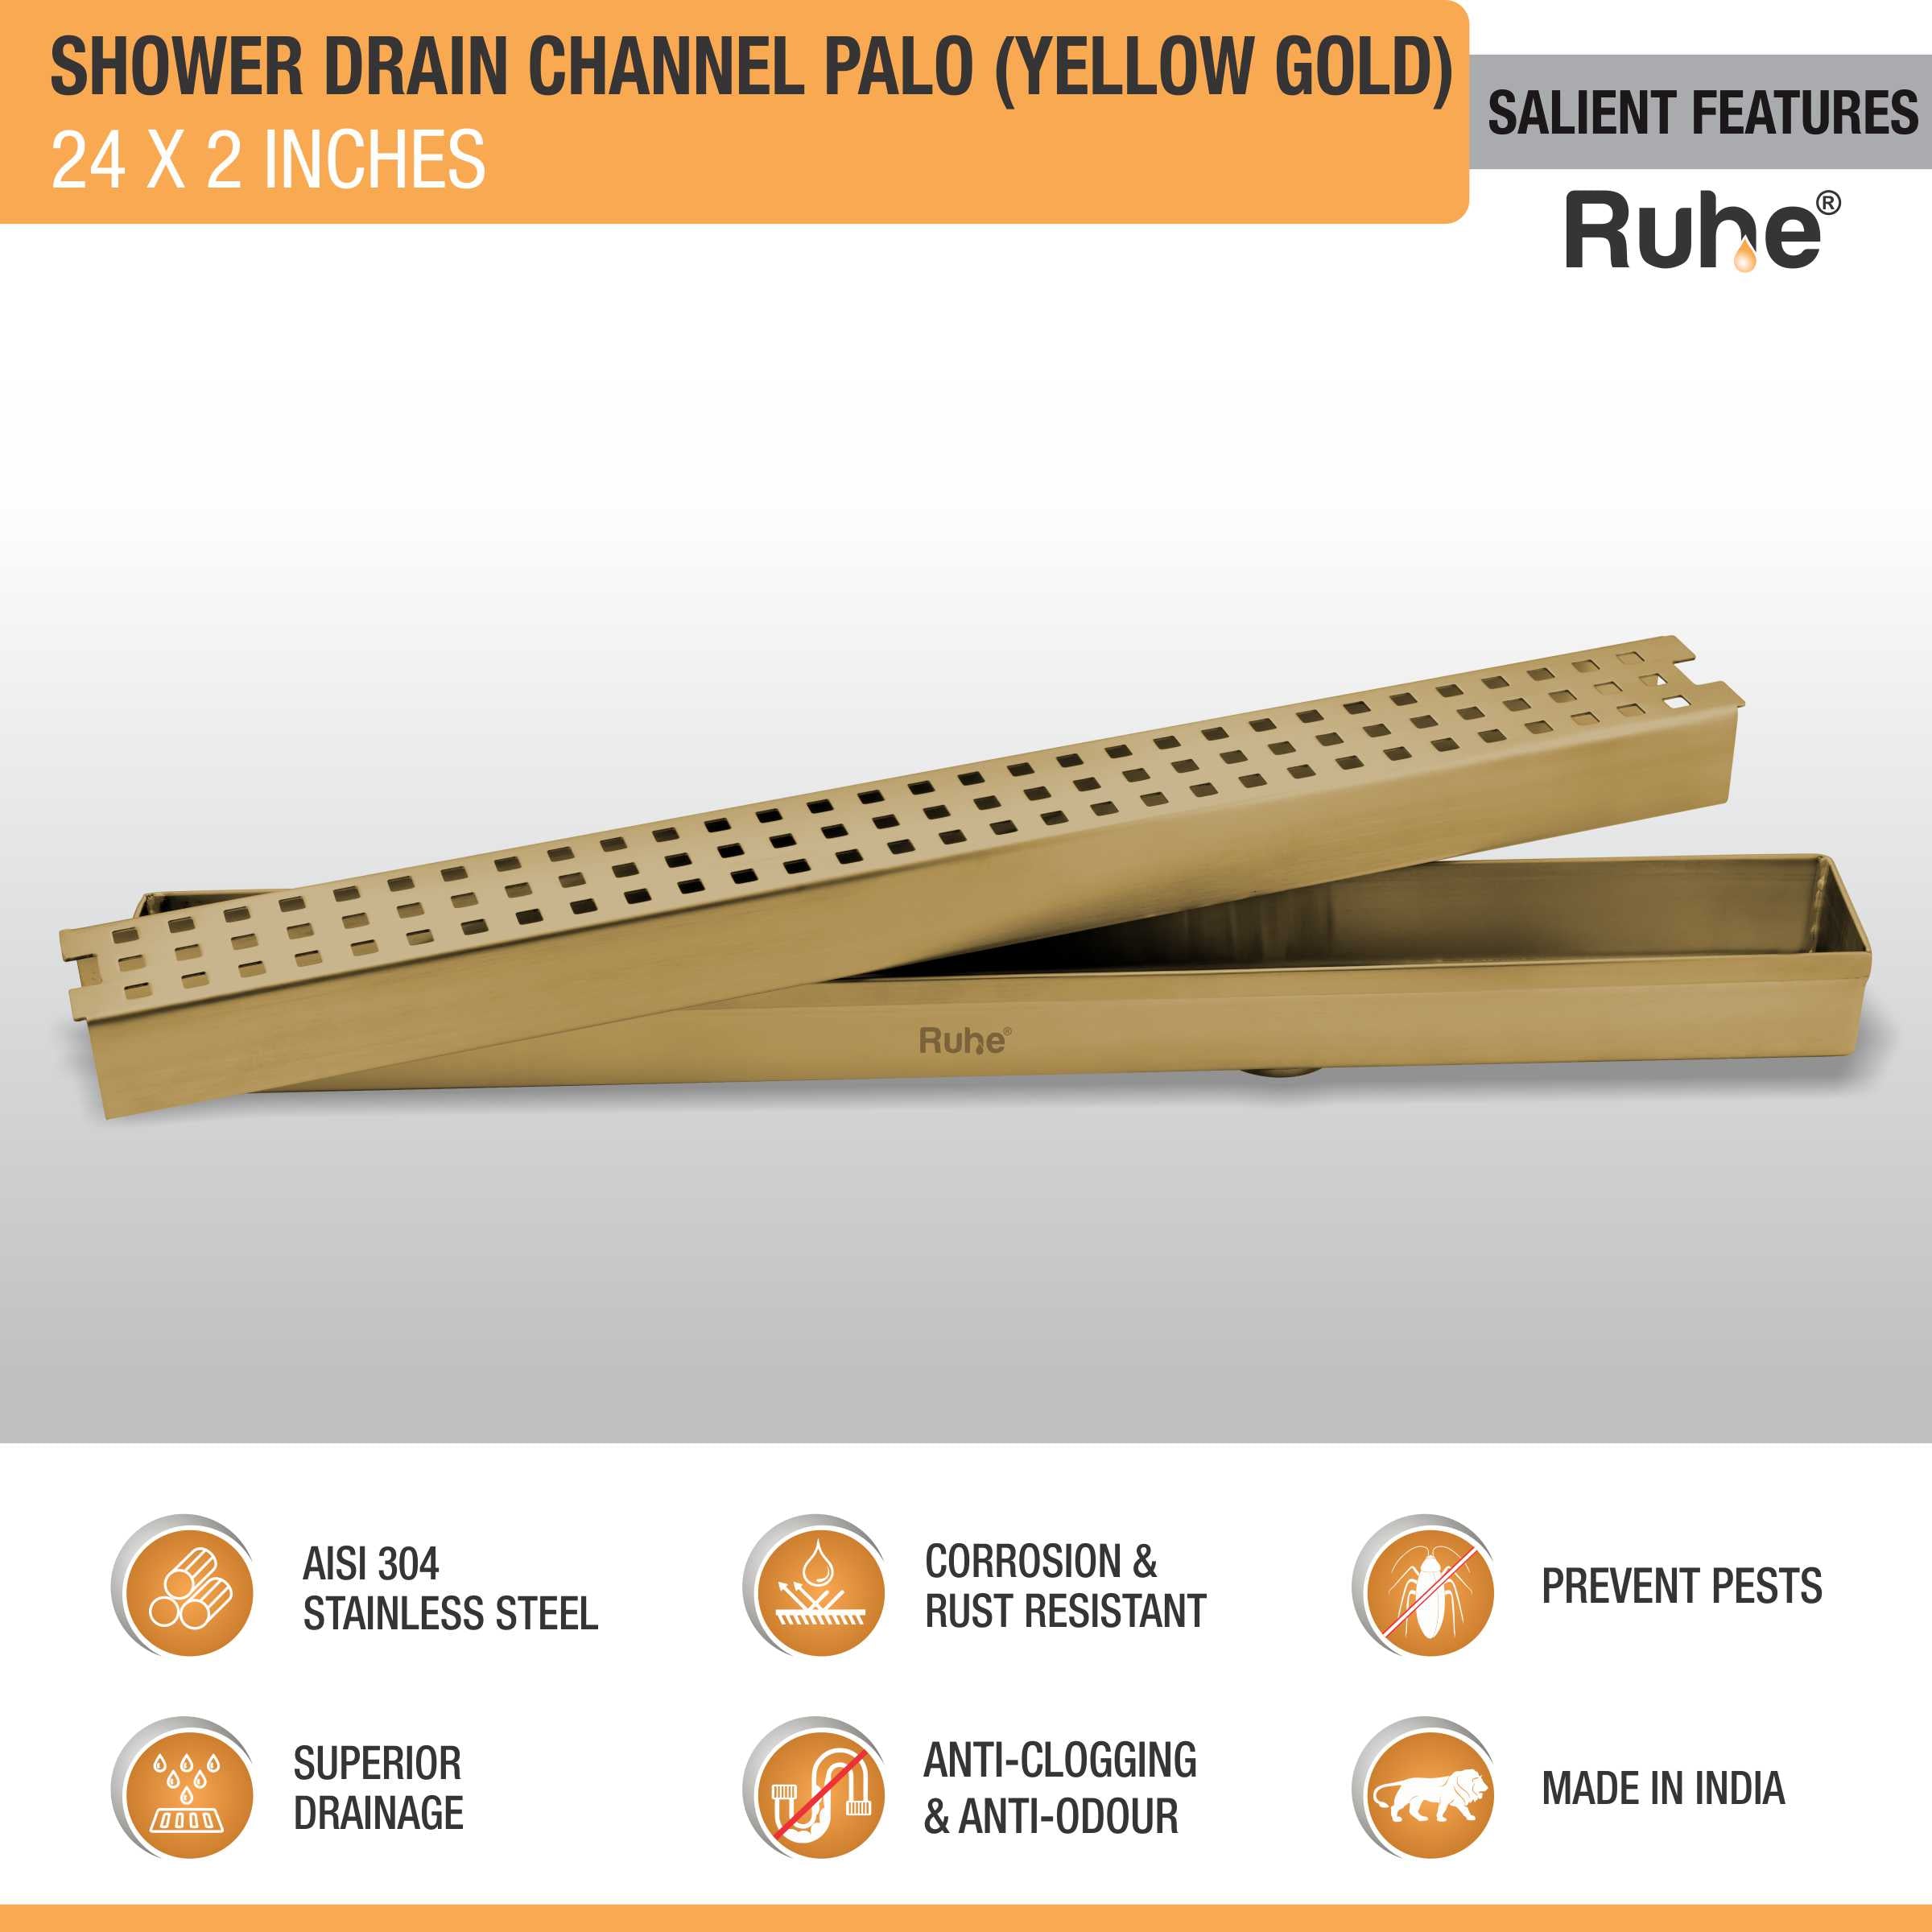 Palo Shower Drain Channel (24 x 2 Inches) YELLOW GOLD features